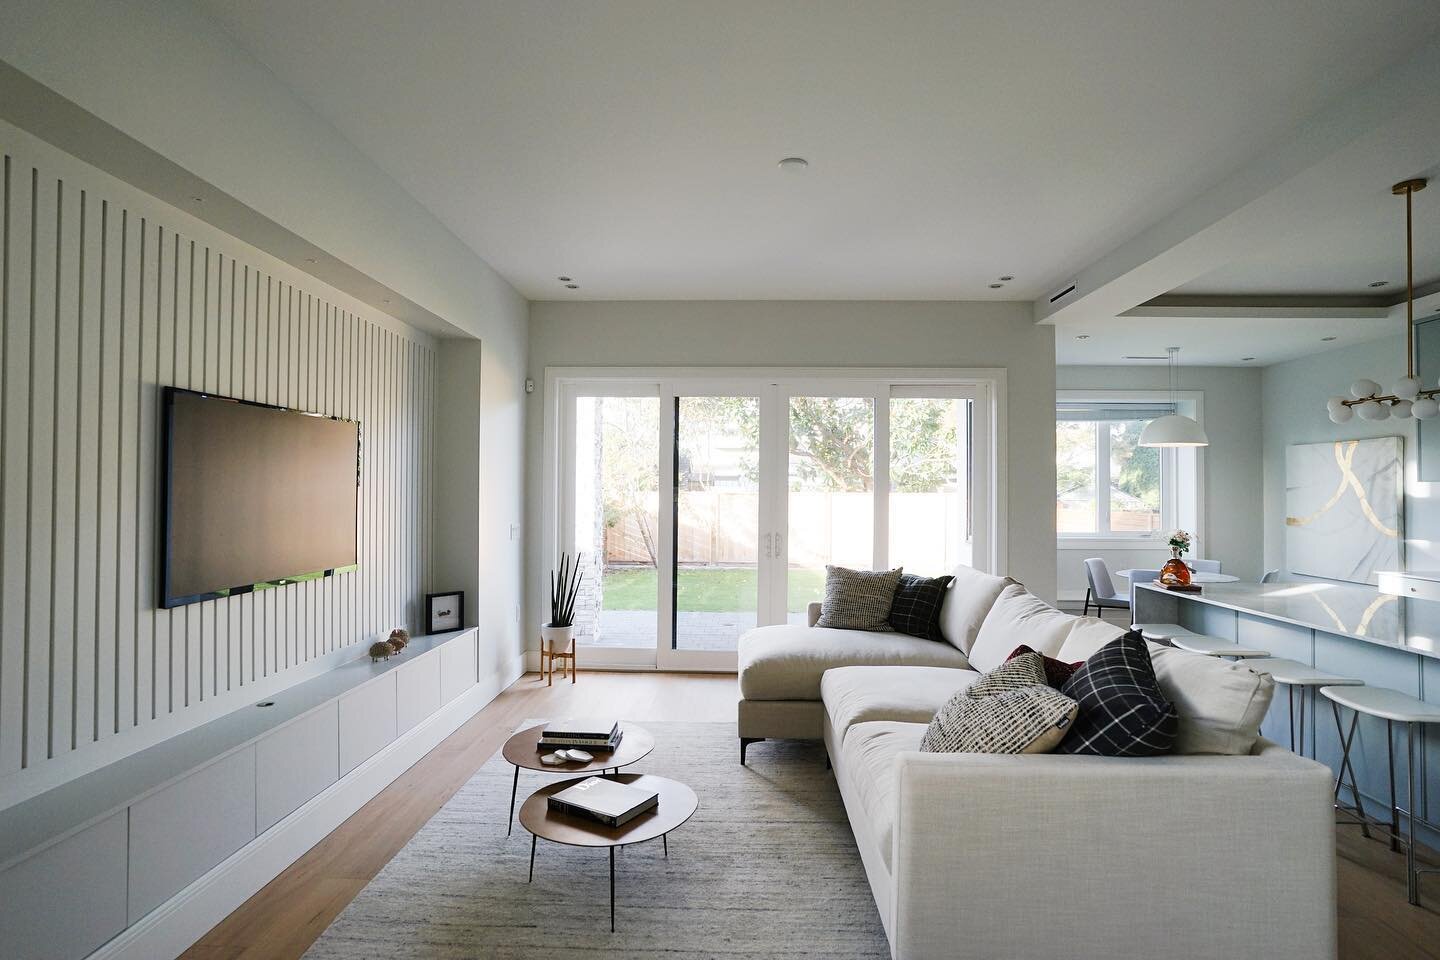 SUBTLE
The mint gray hues was selected to tie in with the soft tones of the house and to embody a sense of growth and renewal to the Historic Steveston Village
⌂
⌂
⌂
#designbuild #architect #bhausliving #residence #interiorlovers #luxuryhomes #home #